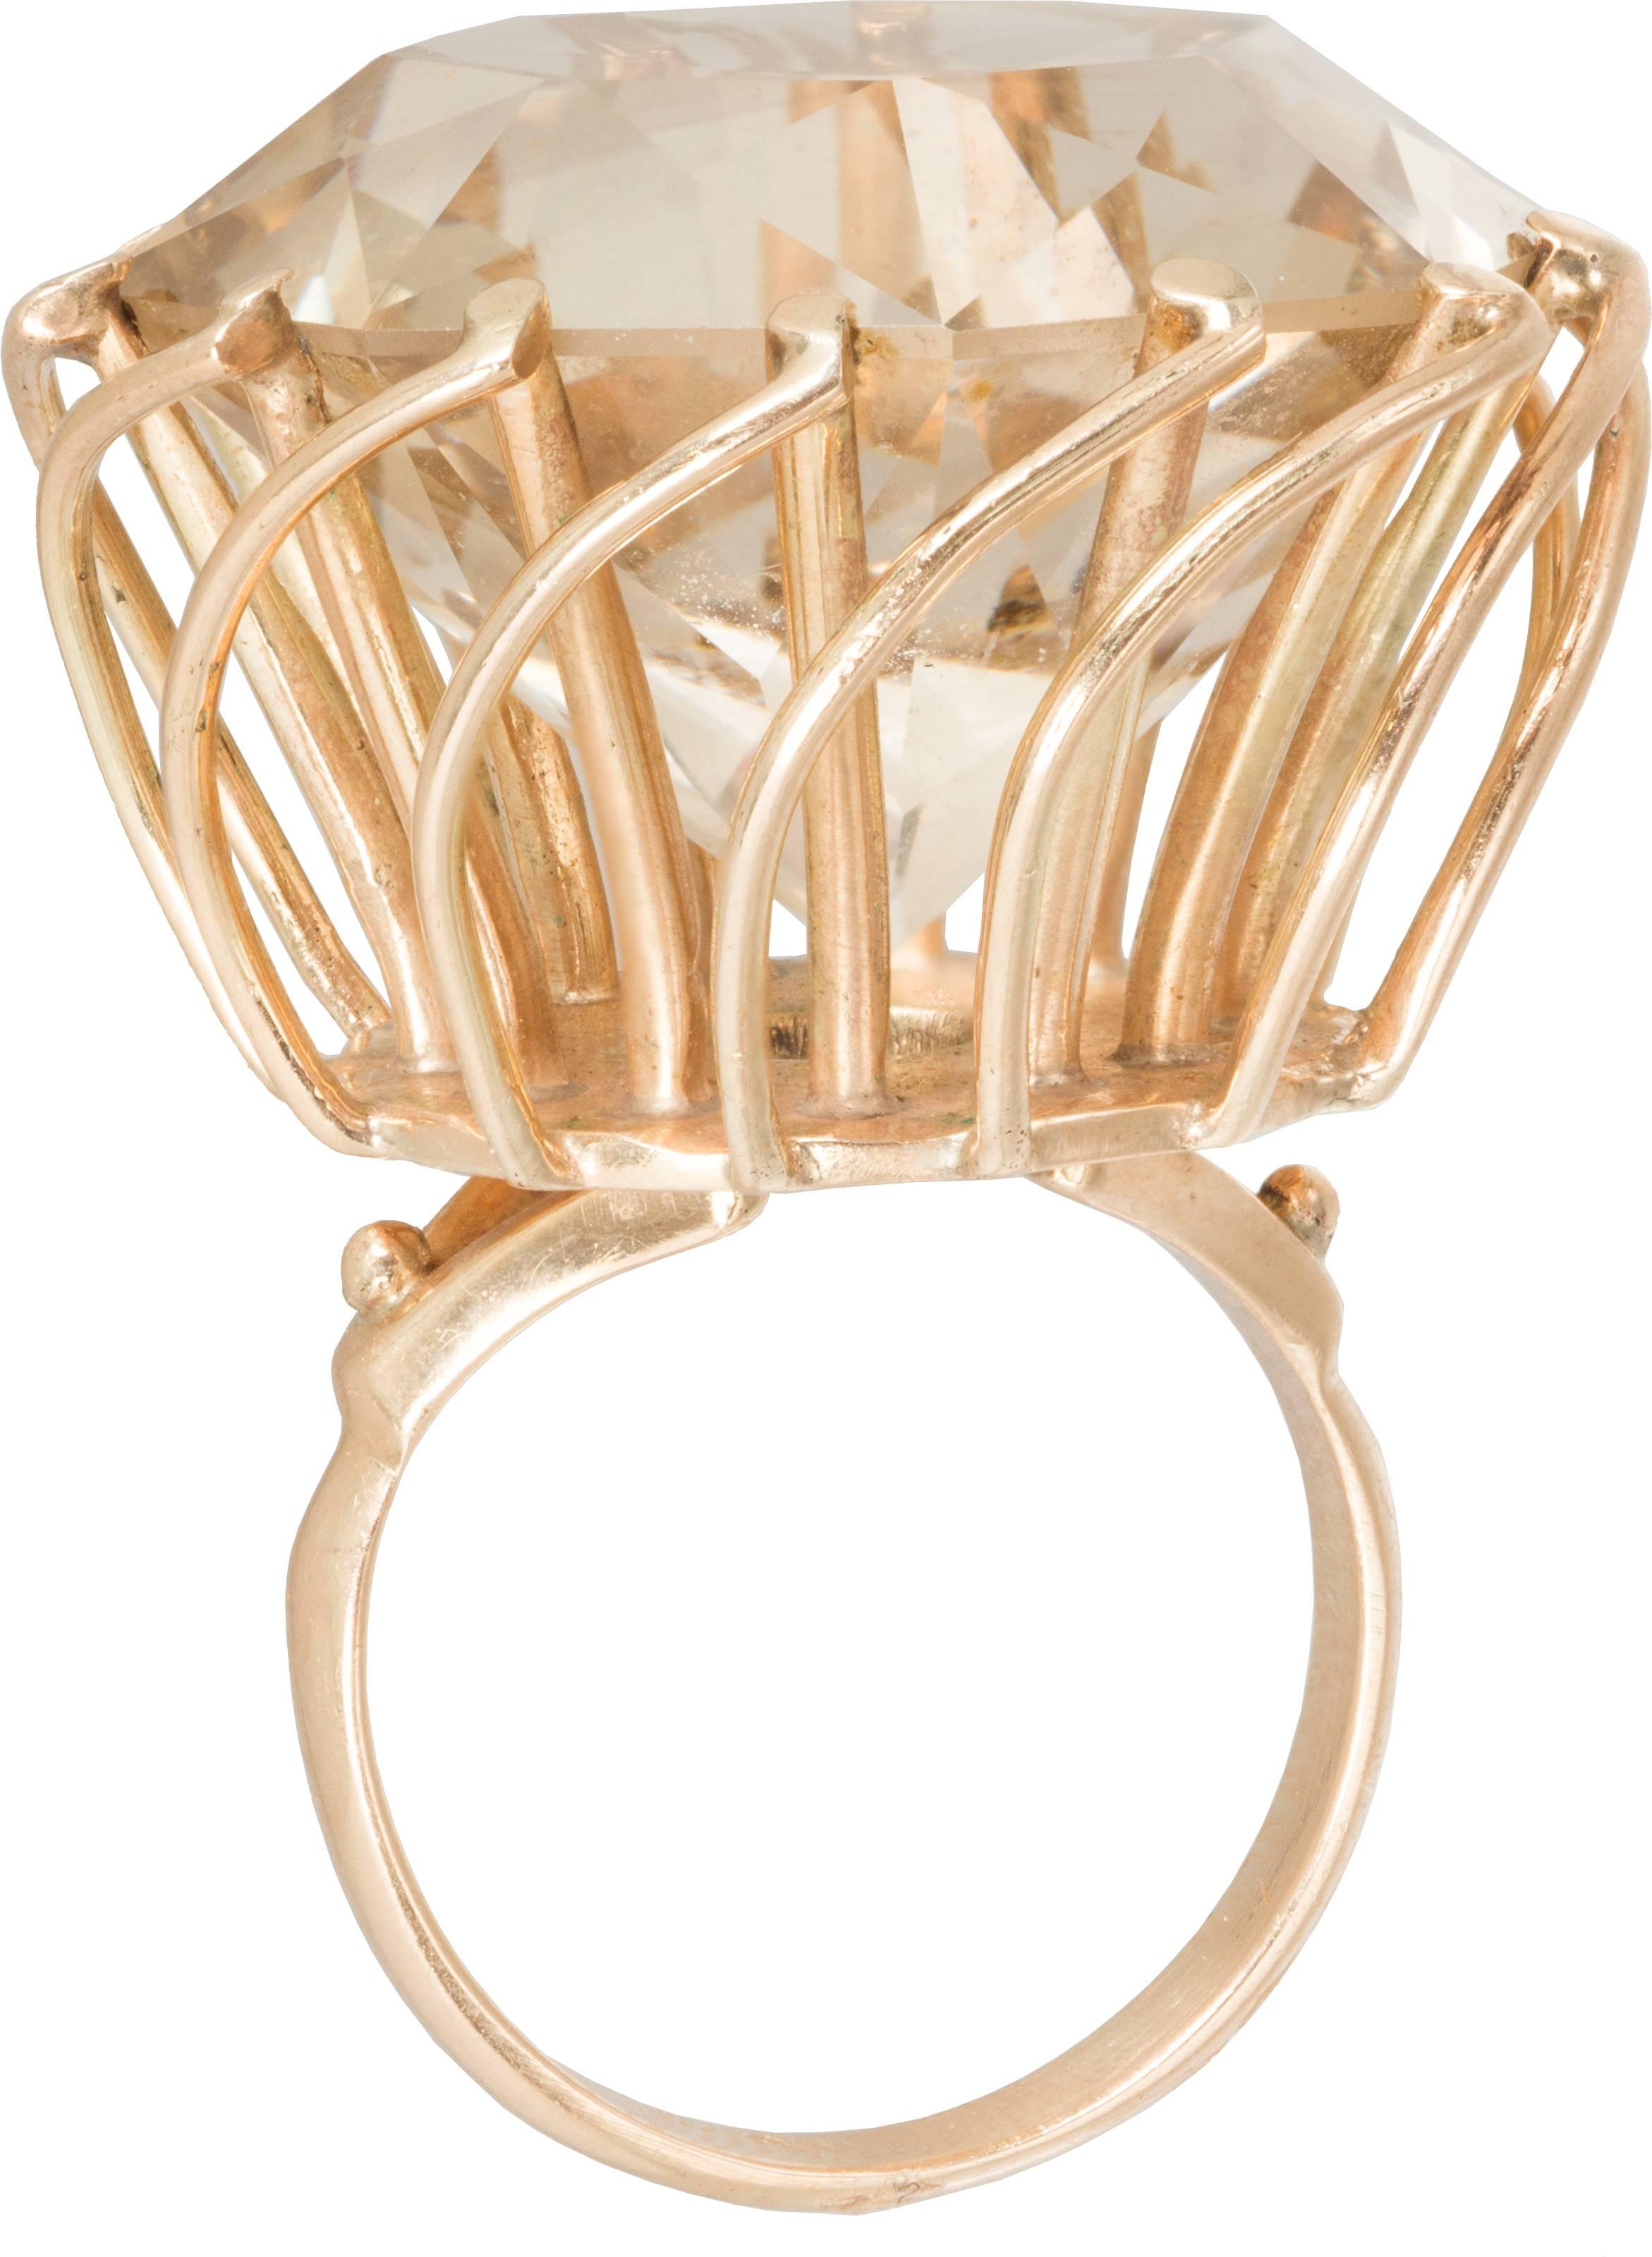 This is a statement making ring, and is so much fun with an unusual basket weave prong design surrounding the stone. The stone weighs approximately 
12 carats.

Ring is a size 7 and is sizable.
